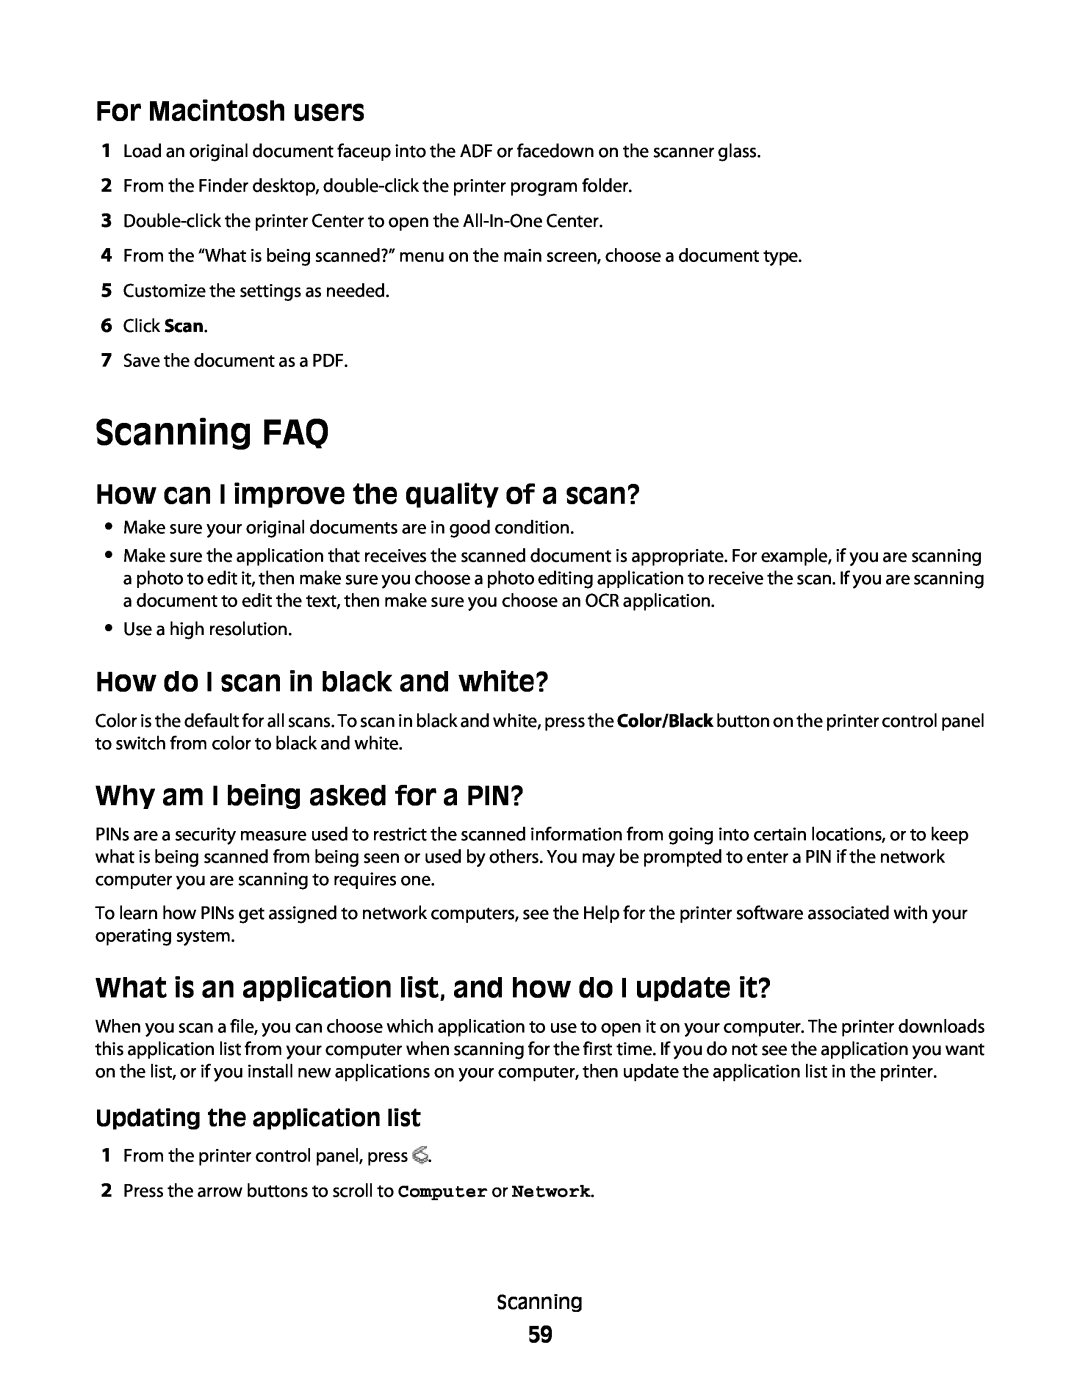 Lexmark 10E Scanning FAQ, For Macintosh users, How can I improve the quality of a scan?, How do I scan in black and white? 